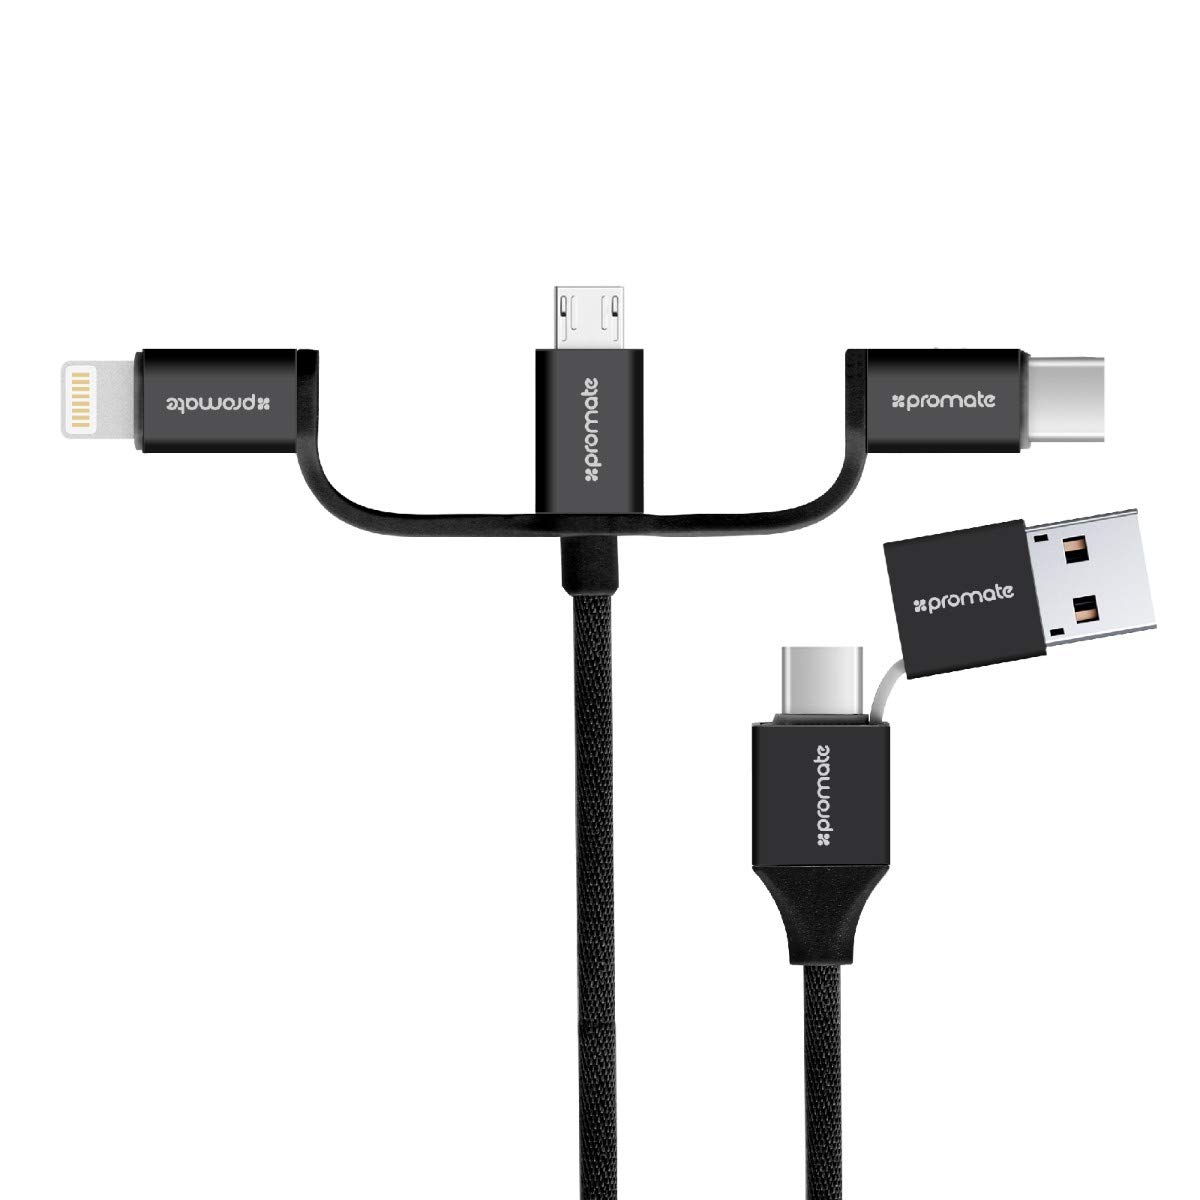 PROMATE UniLink-Trio2 6-in-1 Smart USB Cable for Charging and Data Transfer